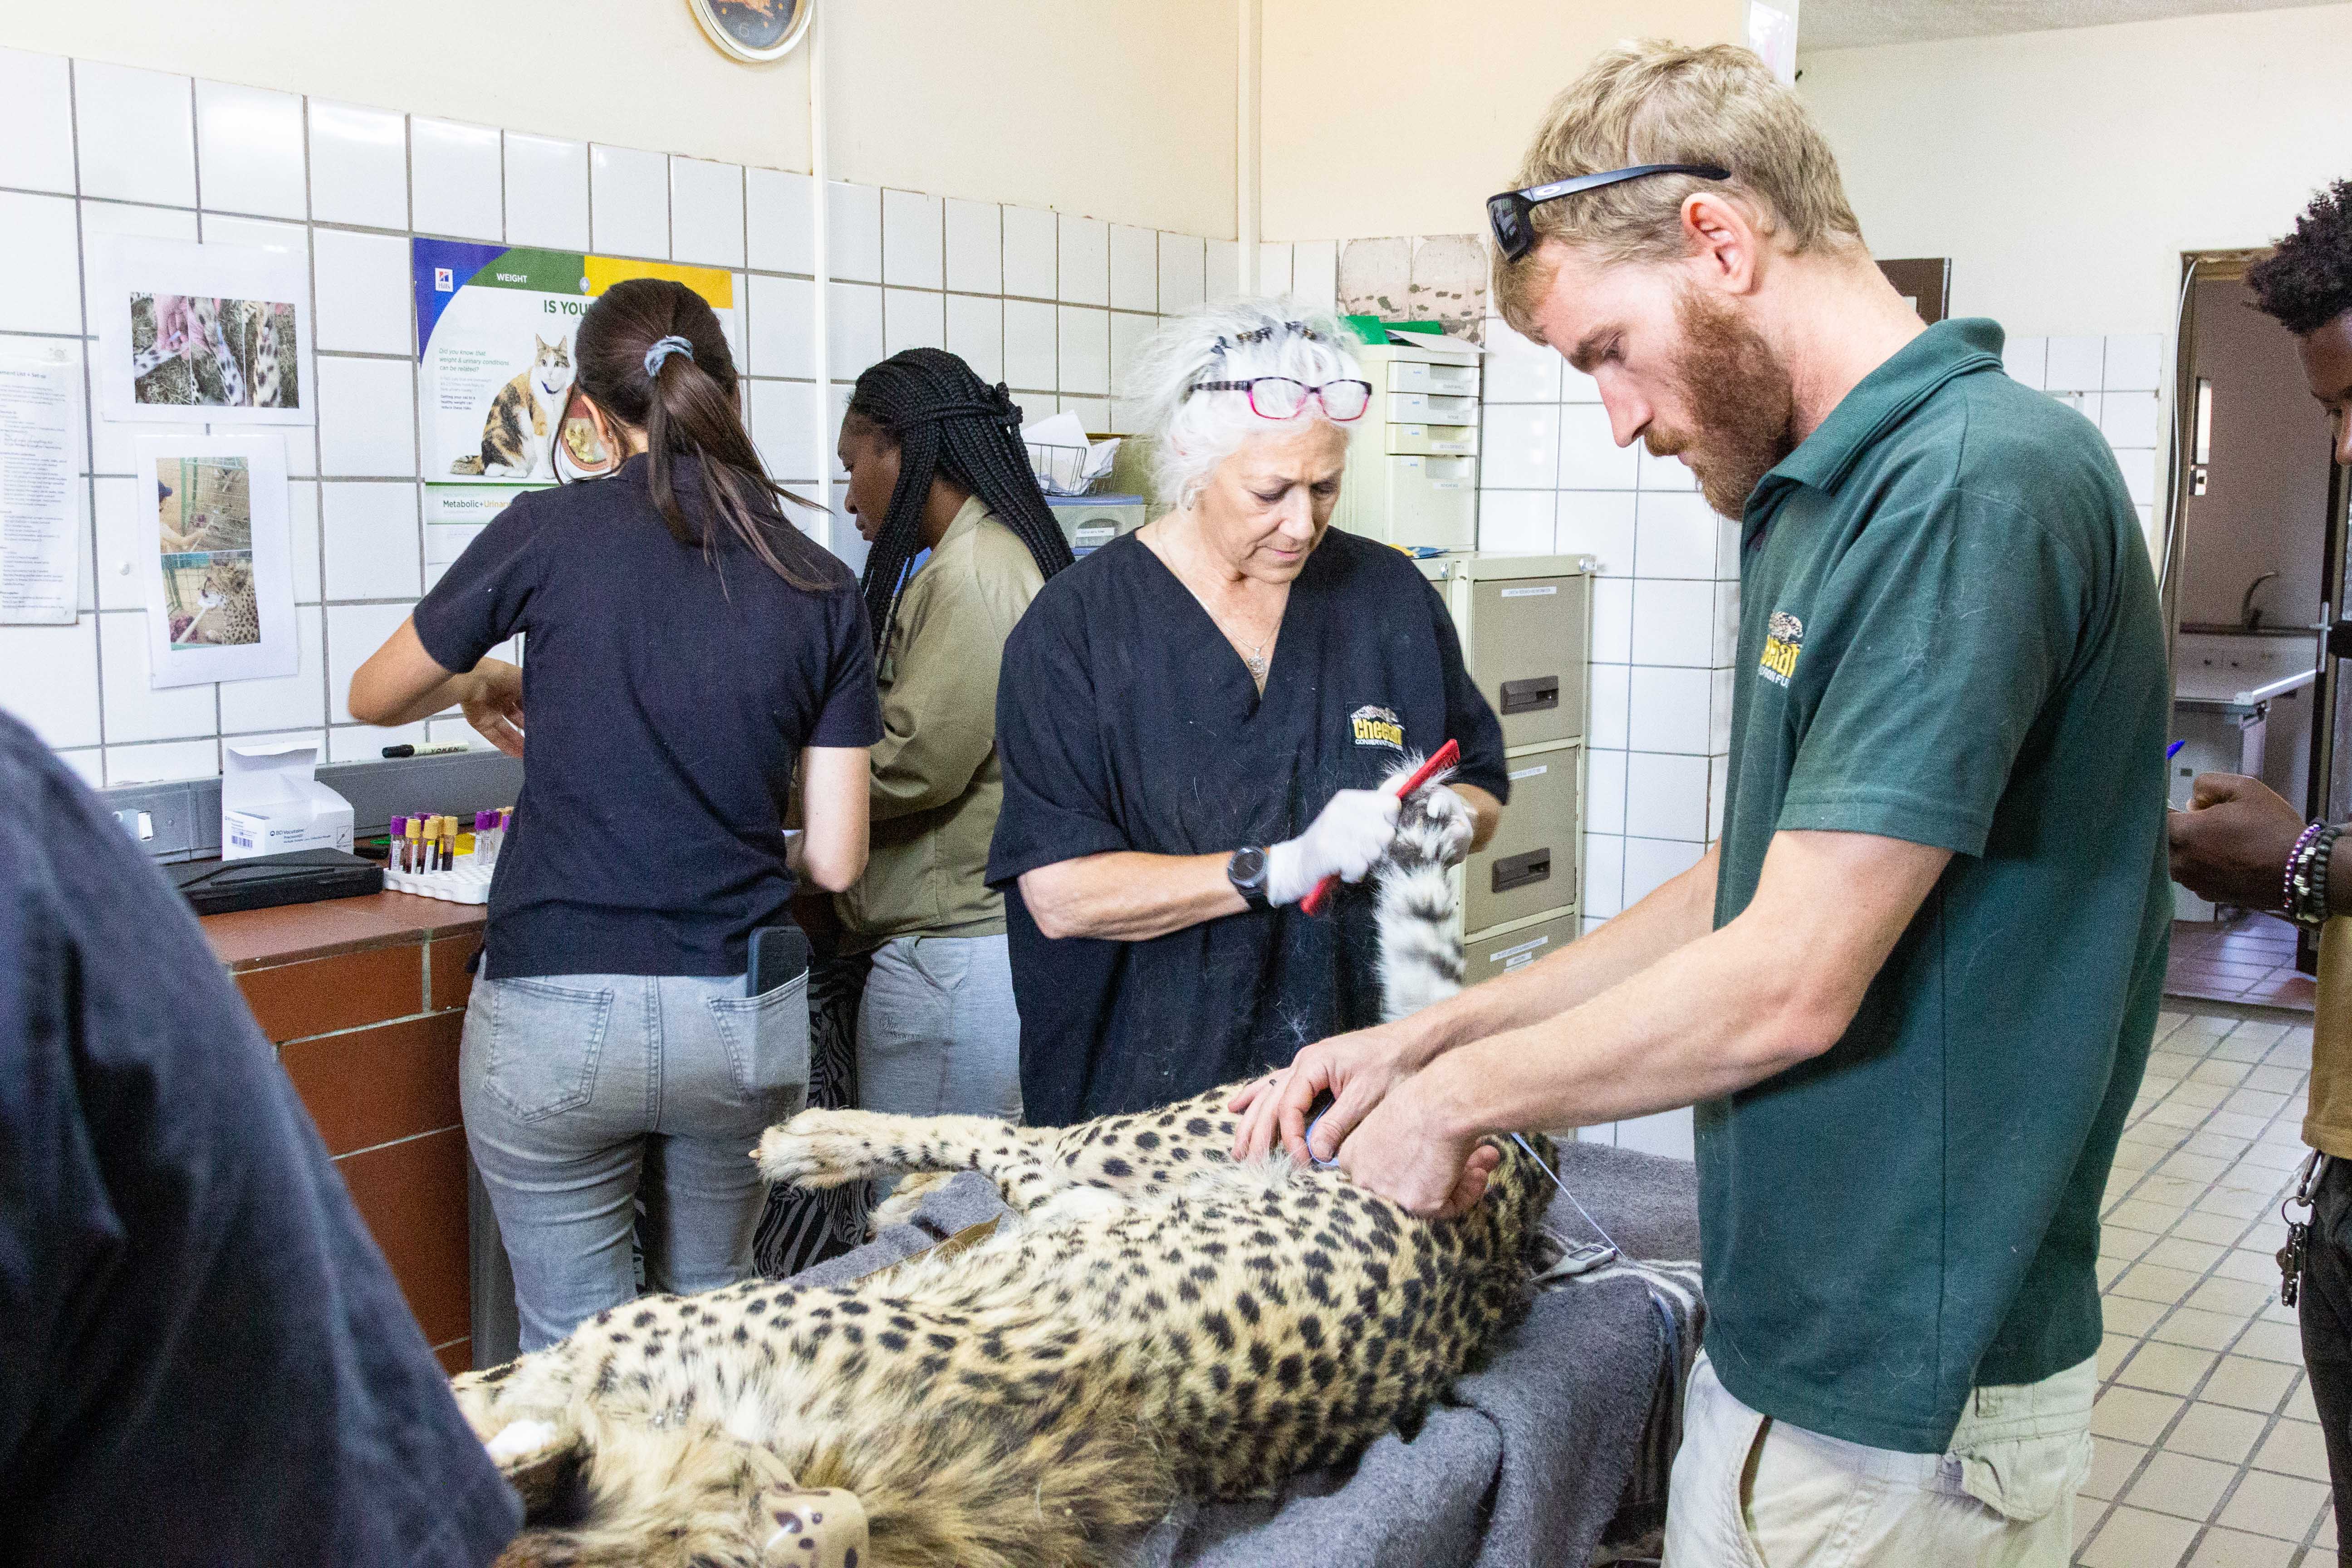 Dr Laurie Marker, founder of the Cheetah Conservation Fund, is seen prepping one of the cheetahs in Namibia ahead of the translocation to India.